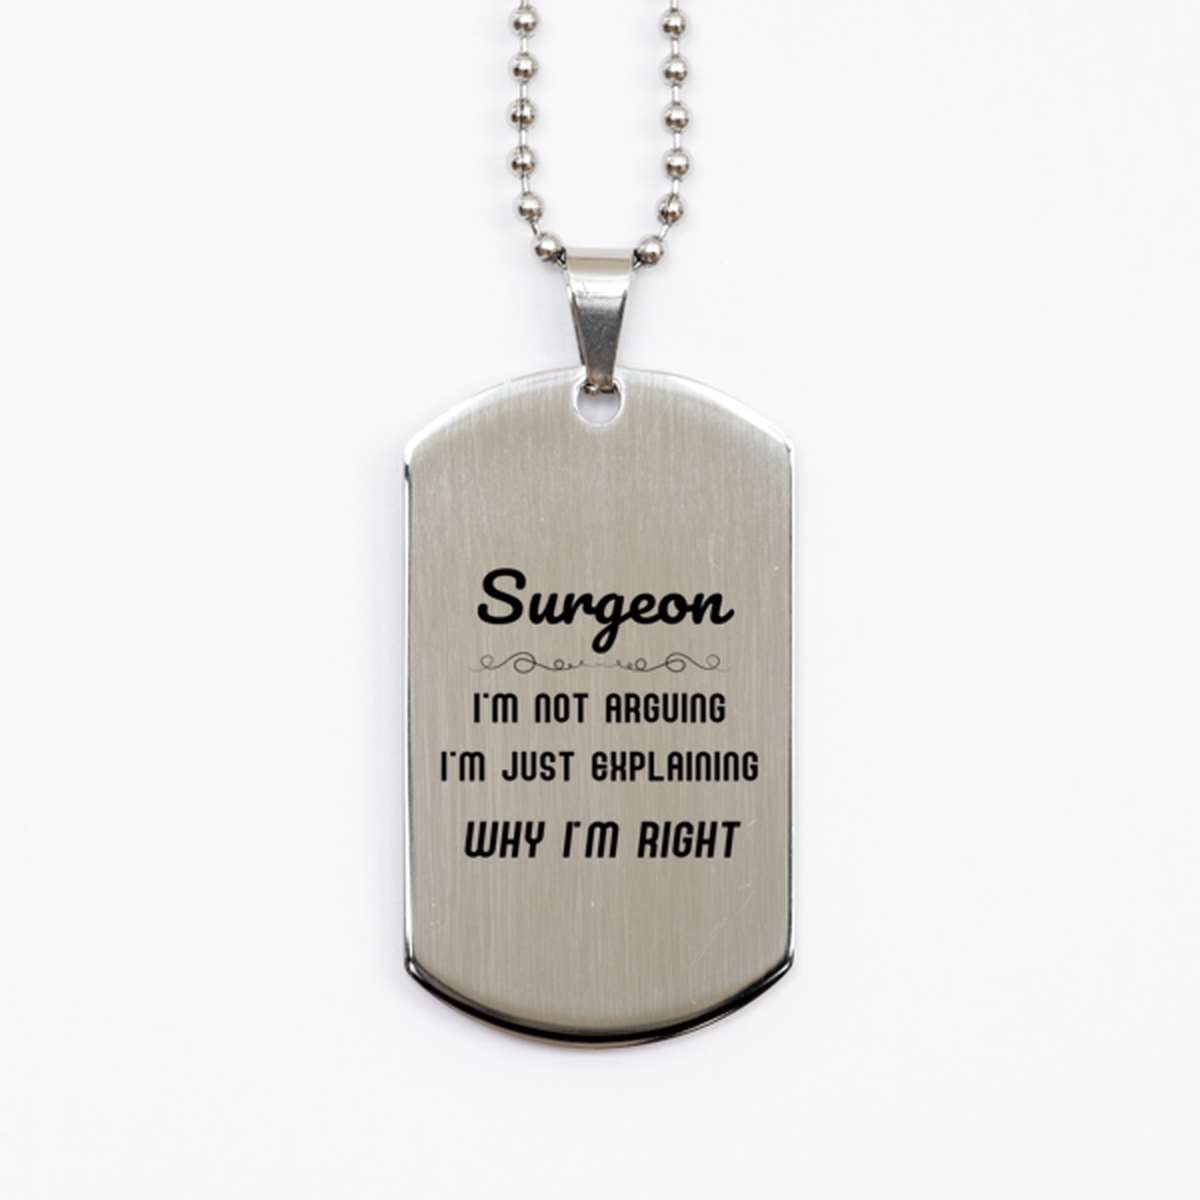 Surgeon I'm not Arguing. I'm Just Explaining Why I'm RIGHT Silver Dog Tag, Funny Saying Quote Surgeon Gifts For Surgeon Graduation Birthday Christmas Gifts for Men Women Coworker